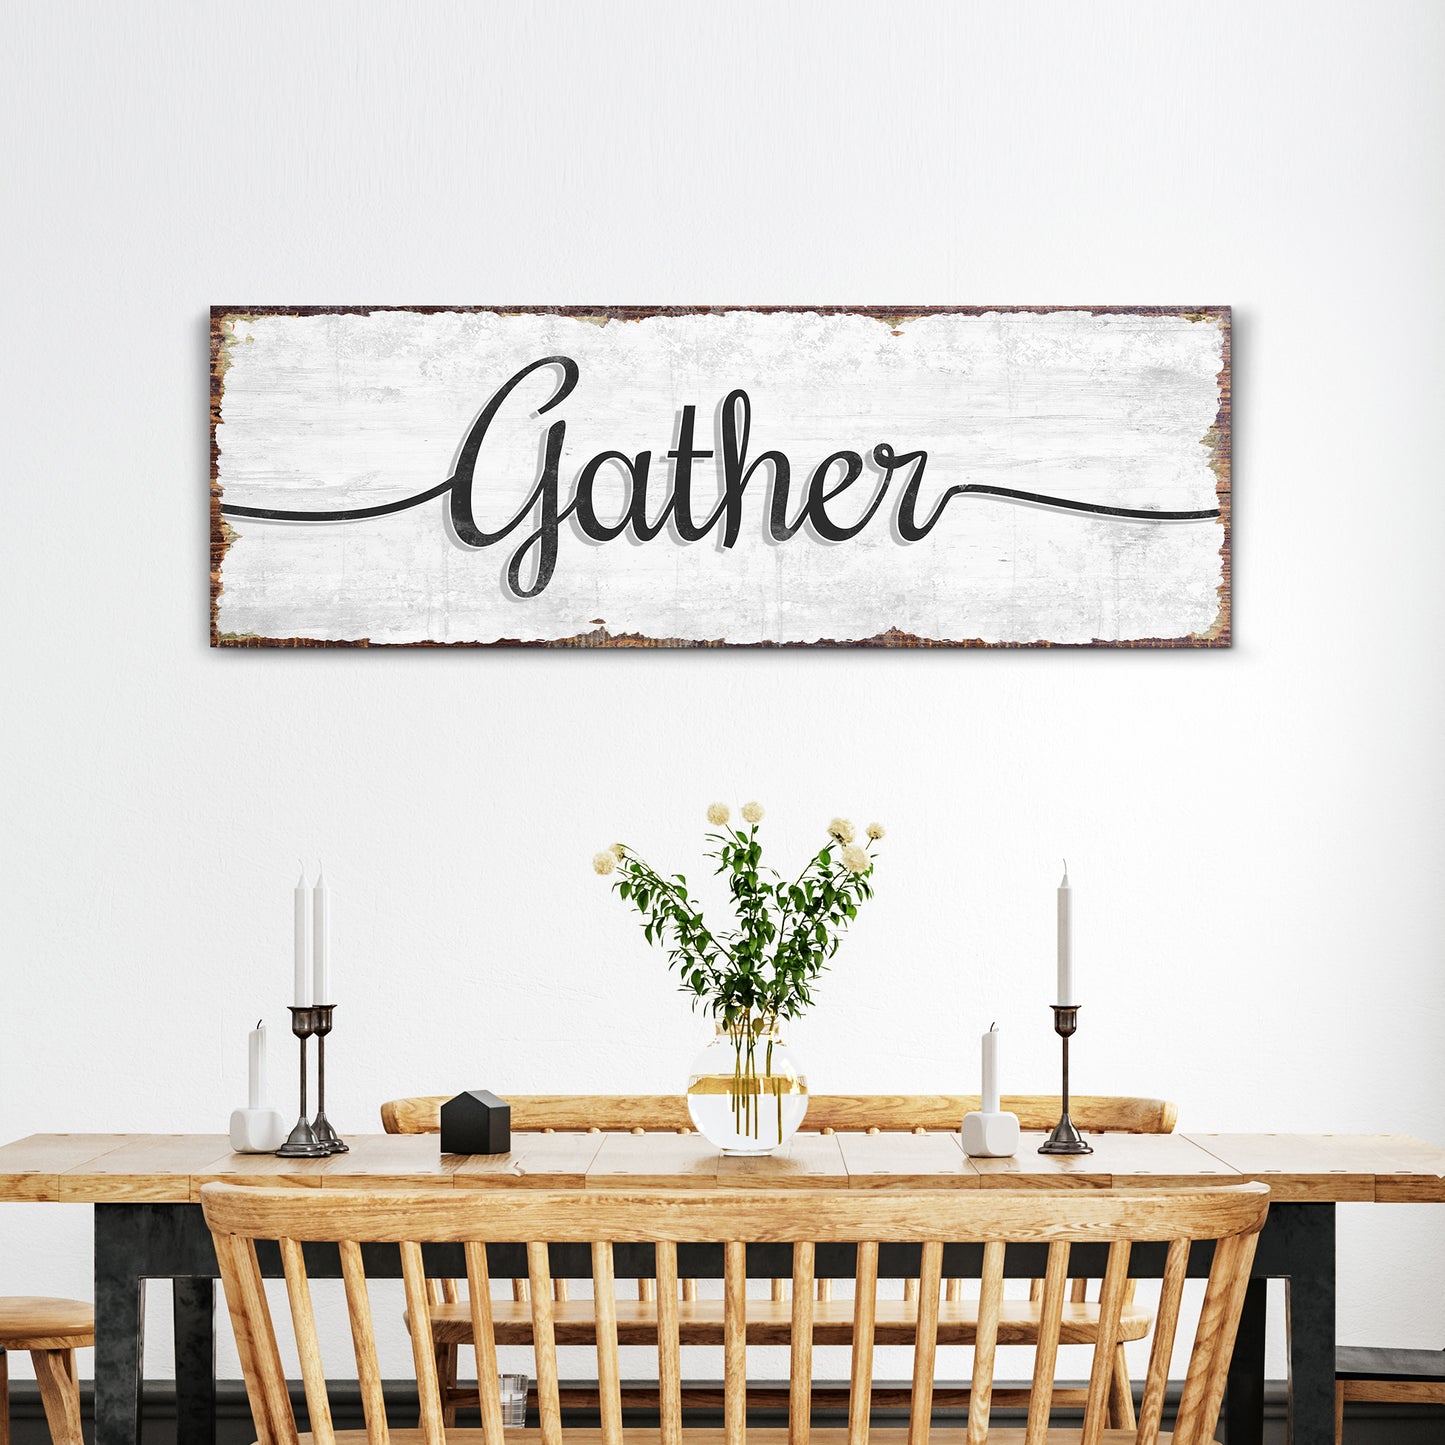 Gather Wall Art Sign Style 1 - Image by Tailored Canvases